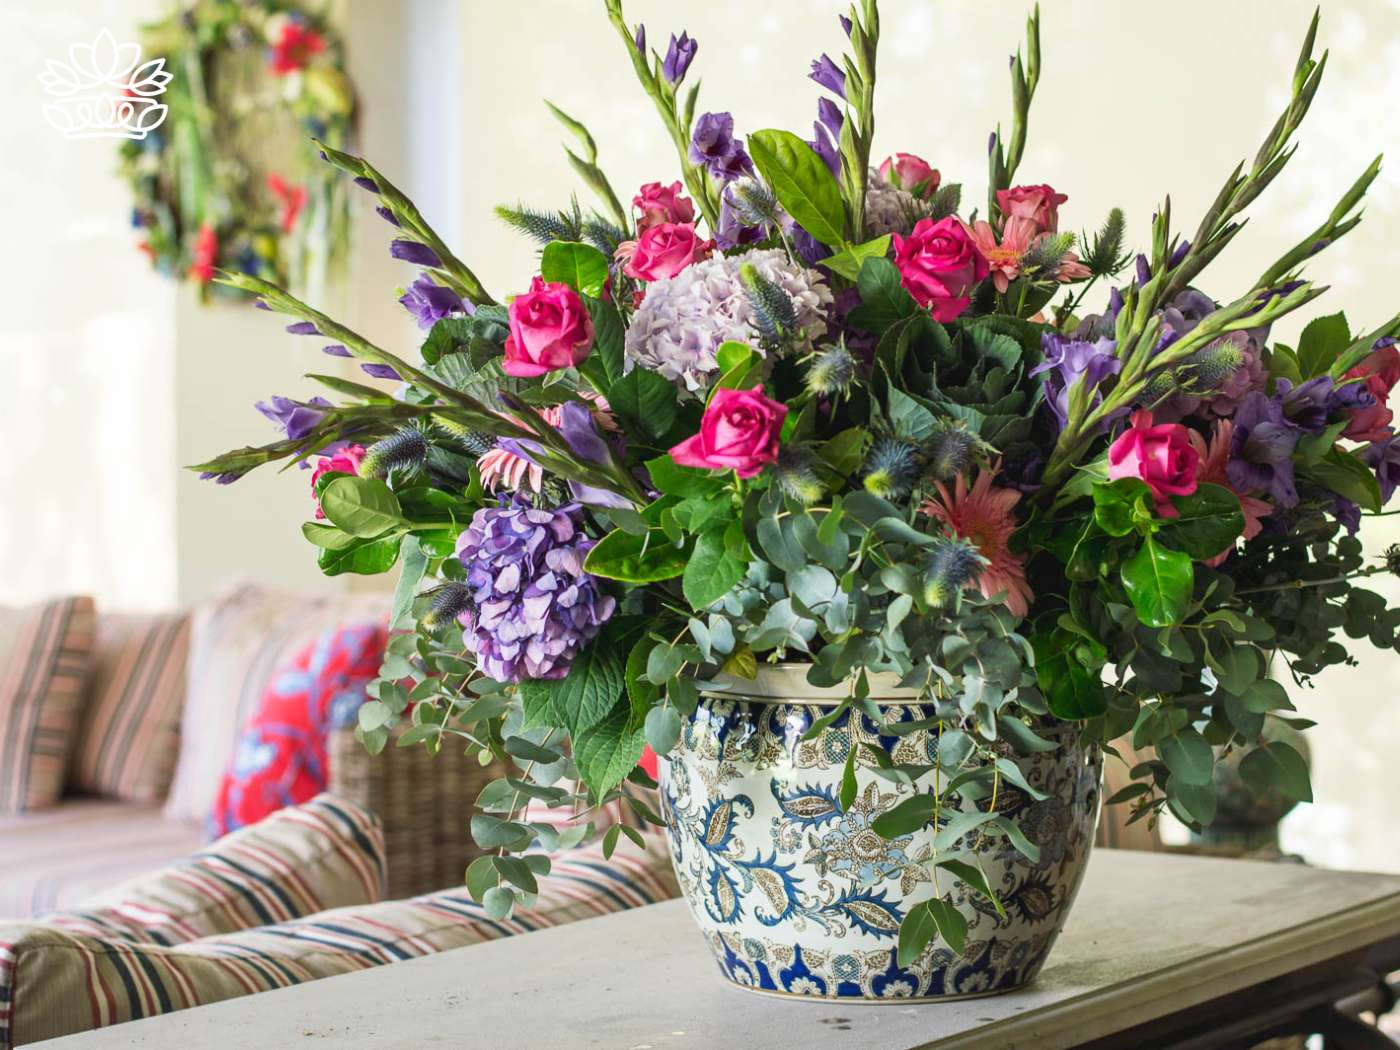 Exquisite porcelain vase overflowing with an arrangement of fresh pink roses, purple blooms, and lush greenery, a signature piece from Fabulous Flowers and Gifts.